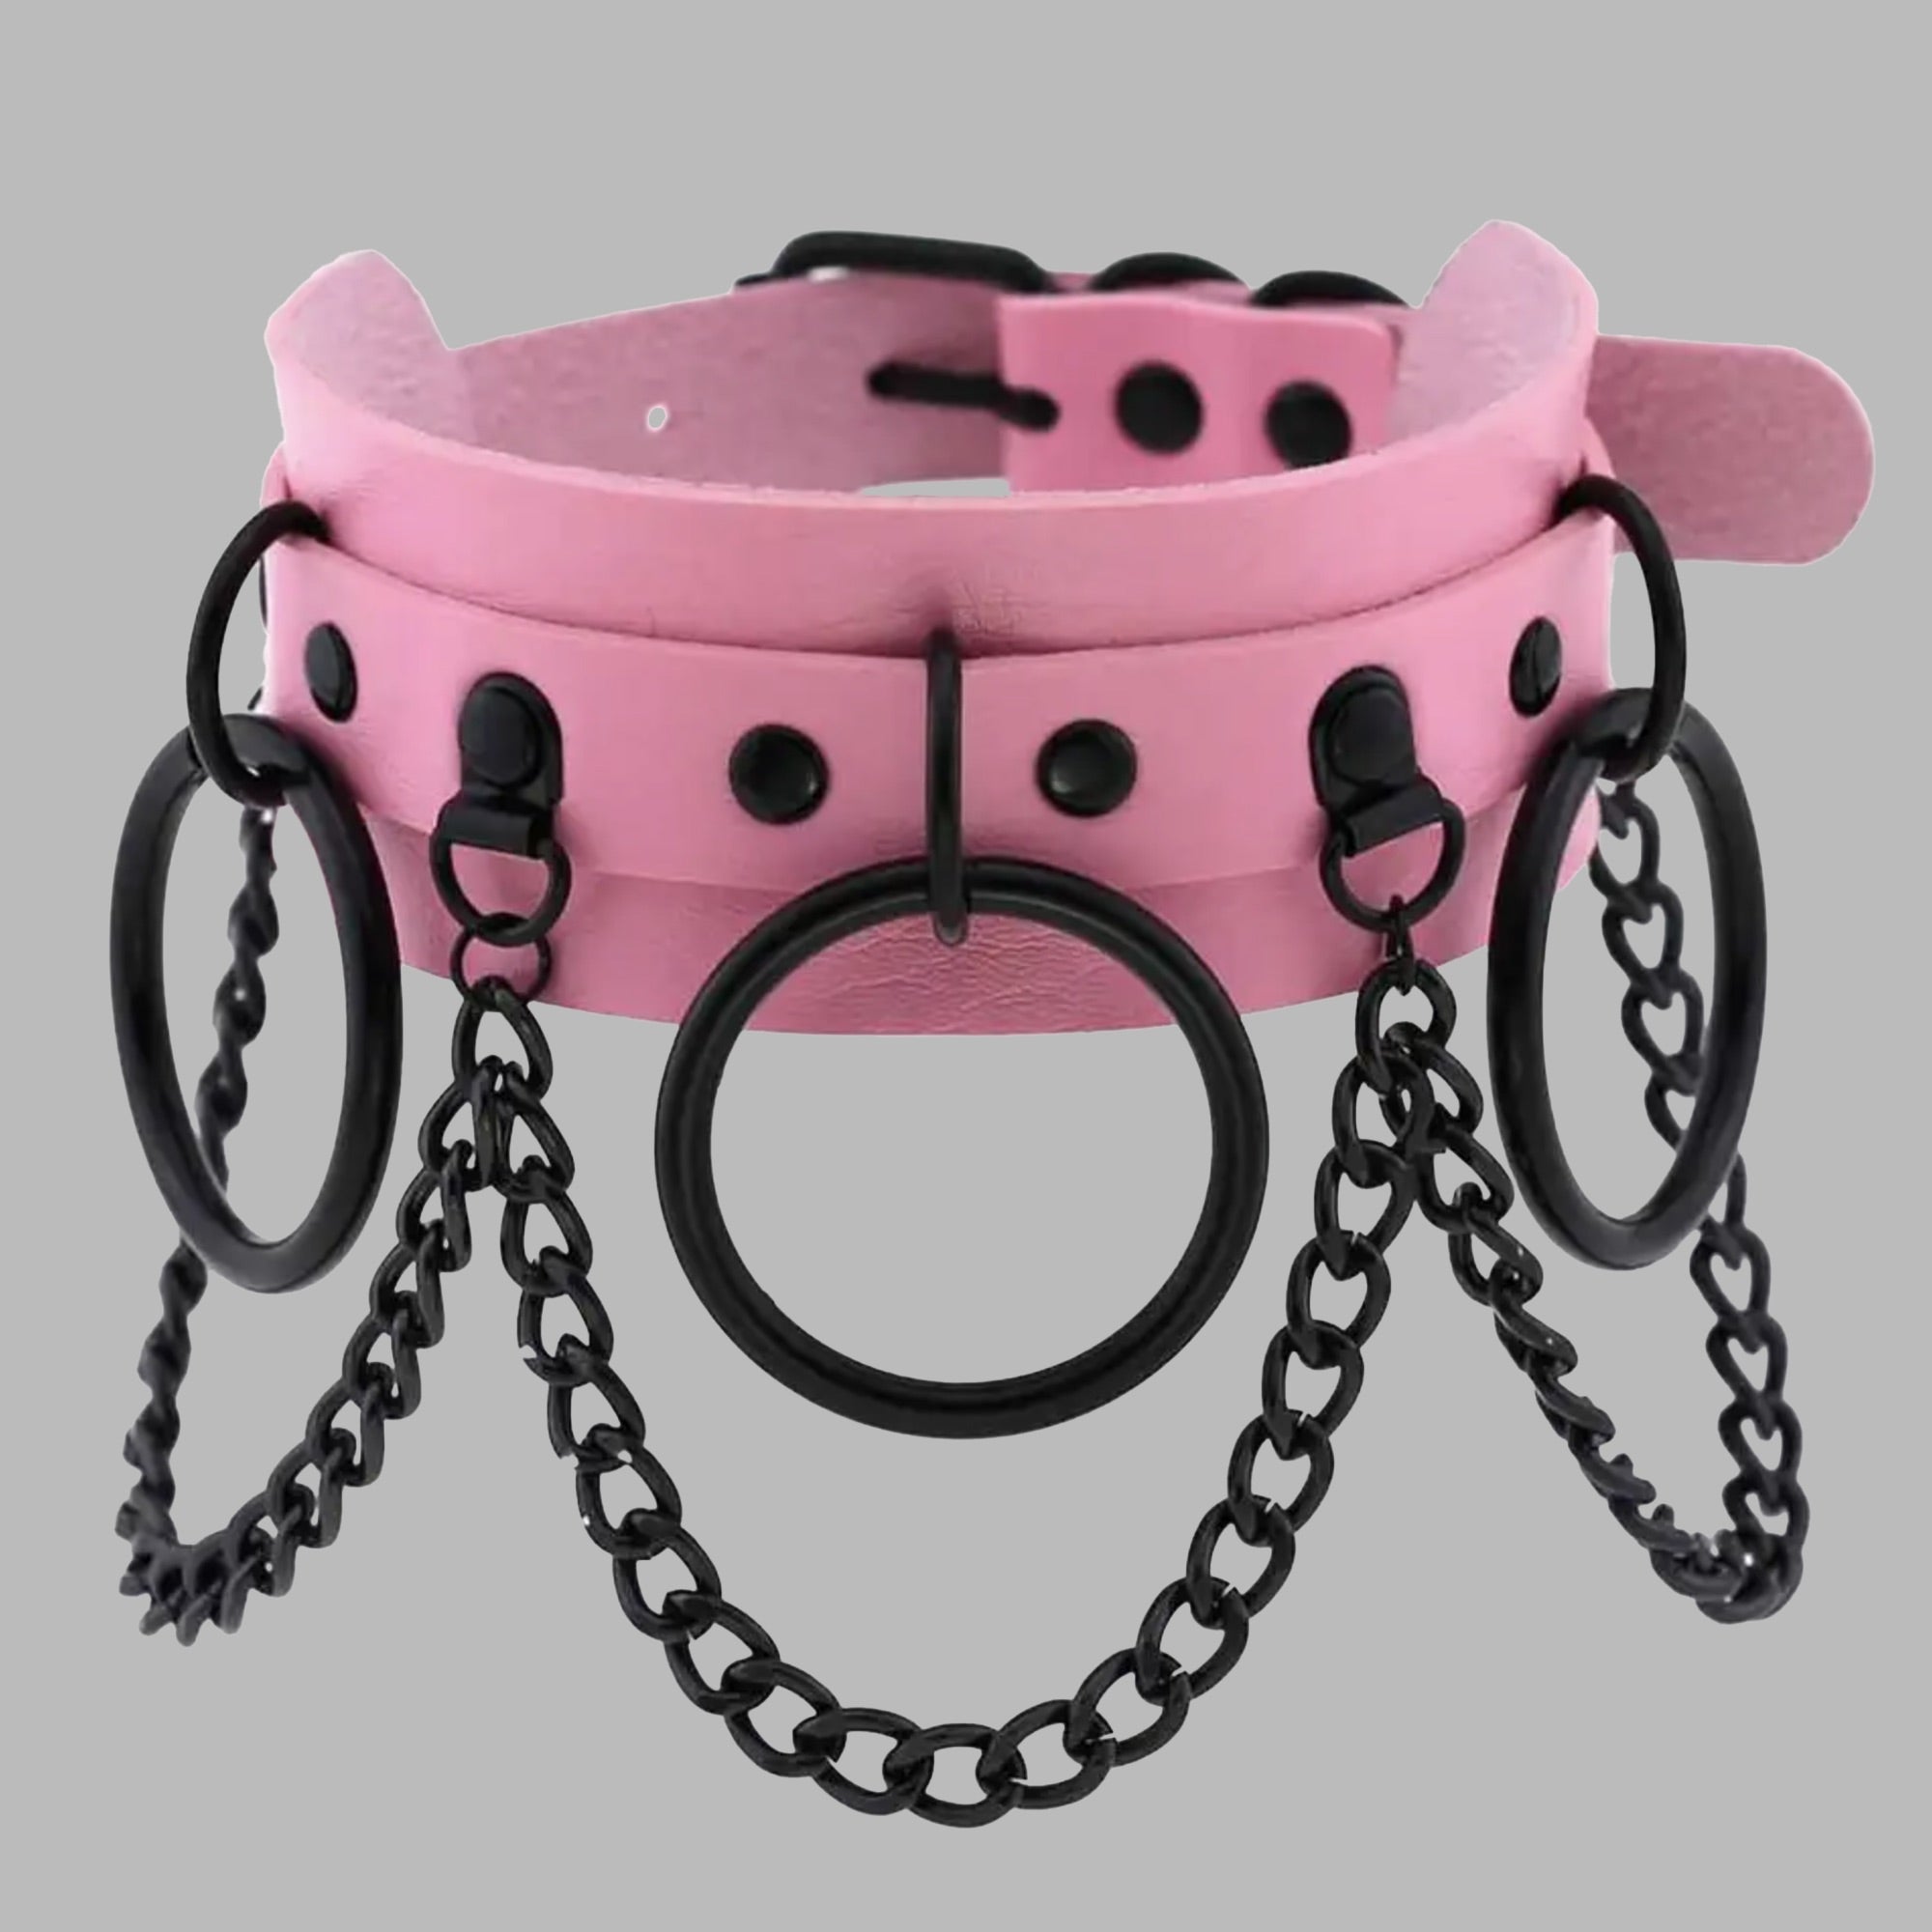 Triple O Ring & Chains Collar - Baby Pink & Black